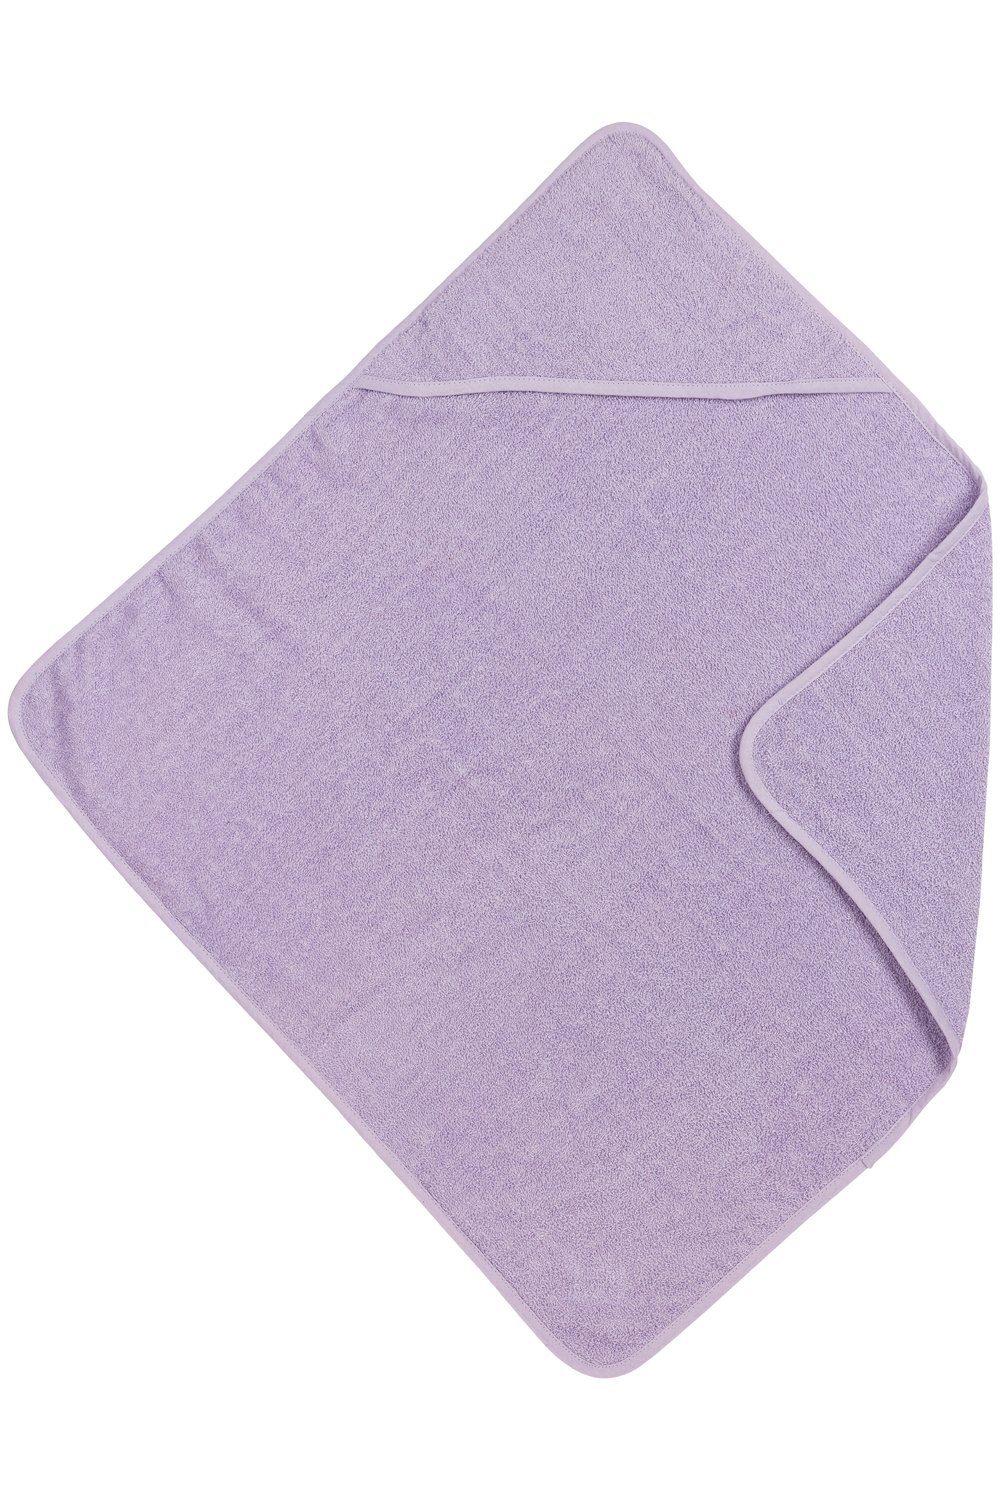 Frottee (1-St), Kapuzenhandtuch Meyco Baby Uni 75x75cm Lilac, Soft